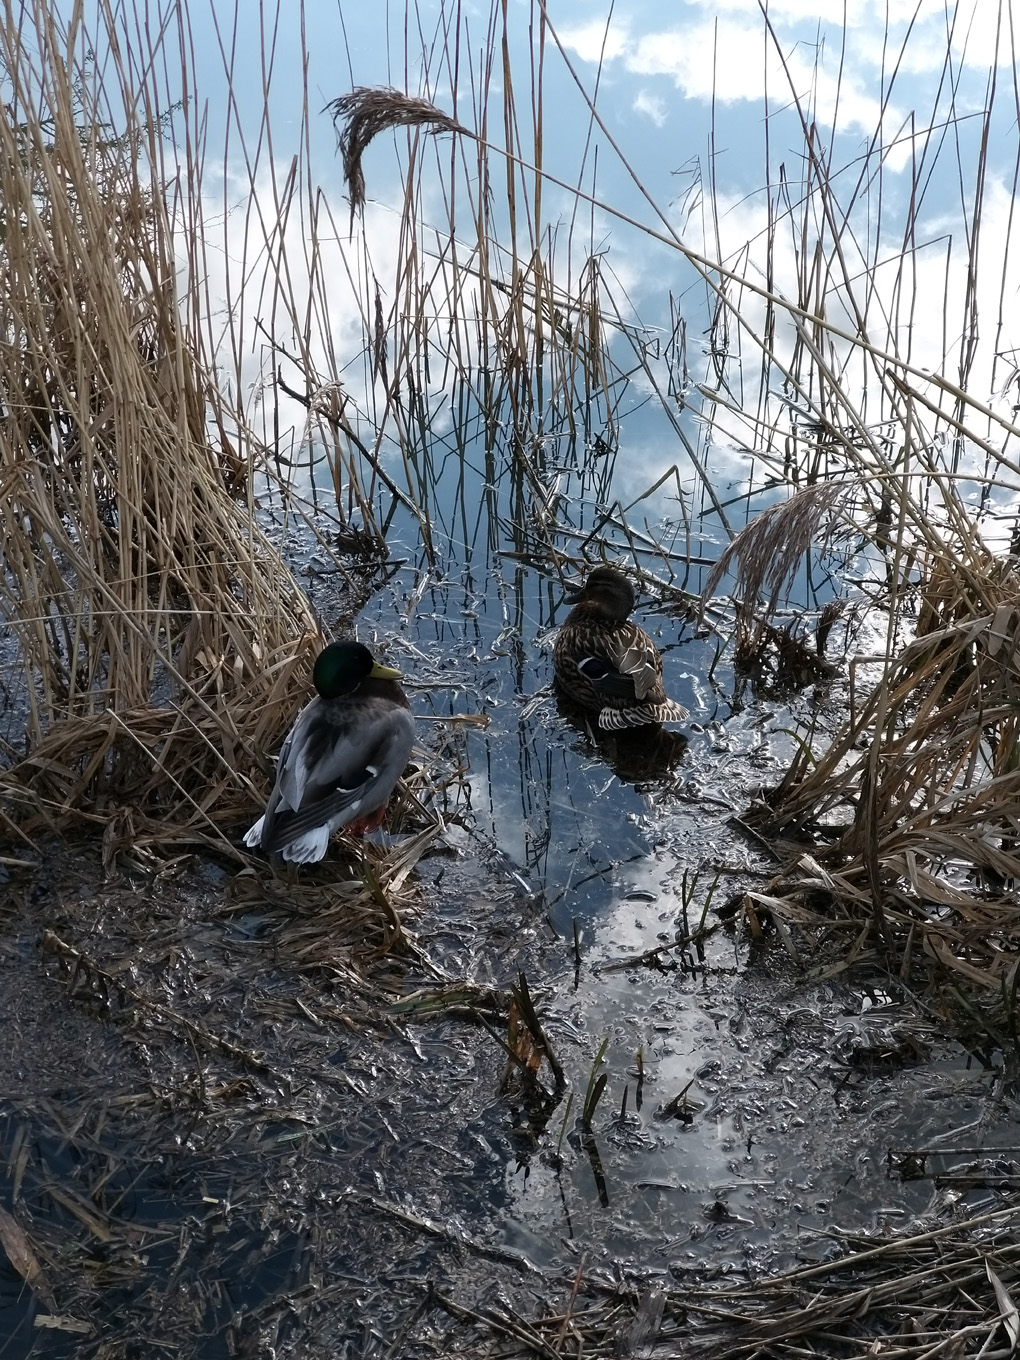 A pair of ducks, nestled in the reeds on the canal, clouds and sky reflected in the water.